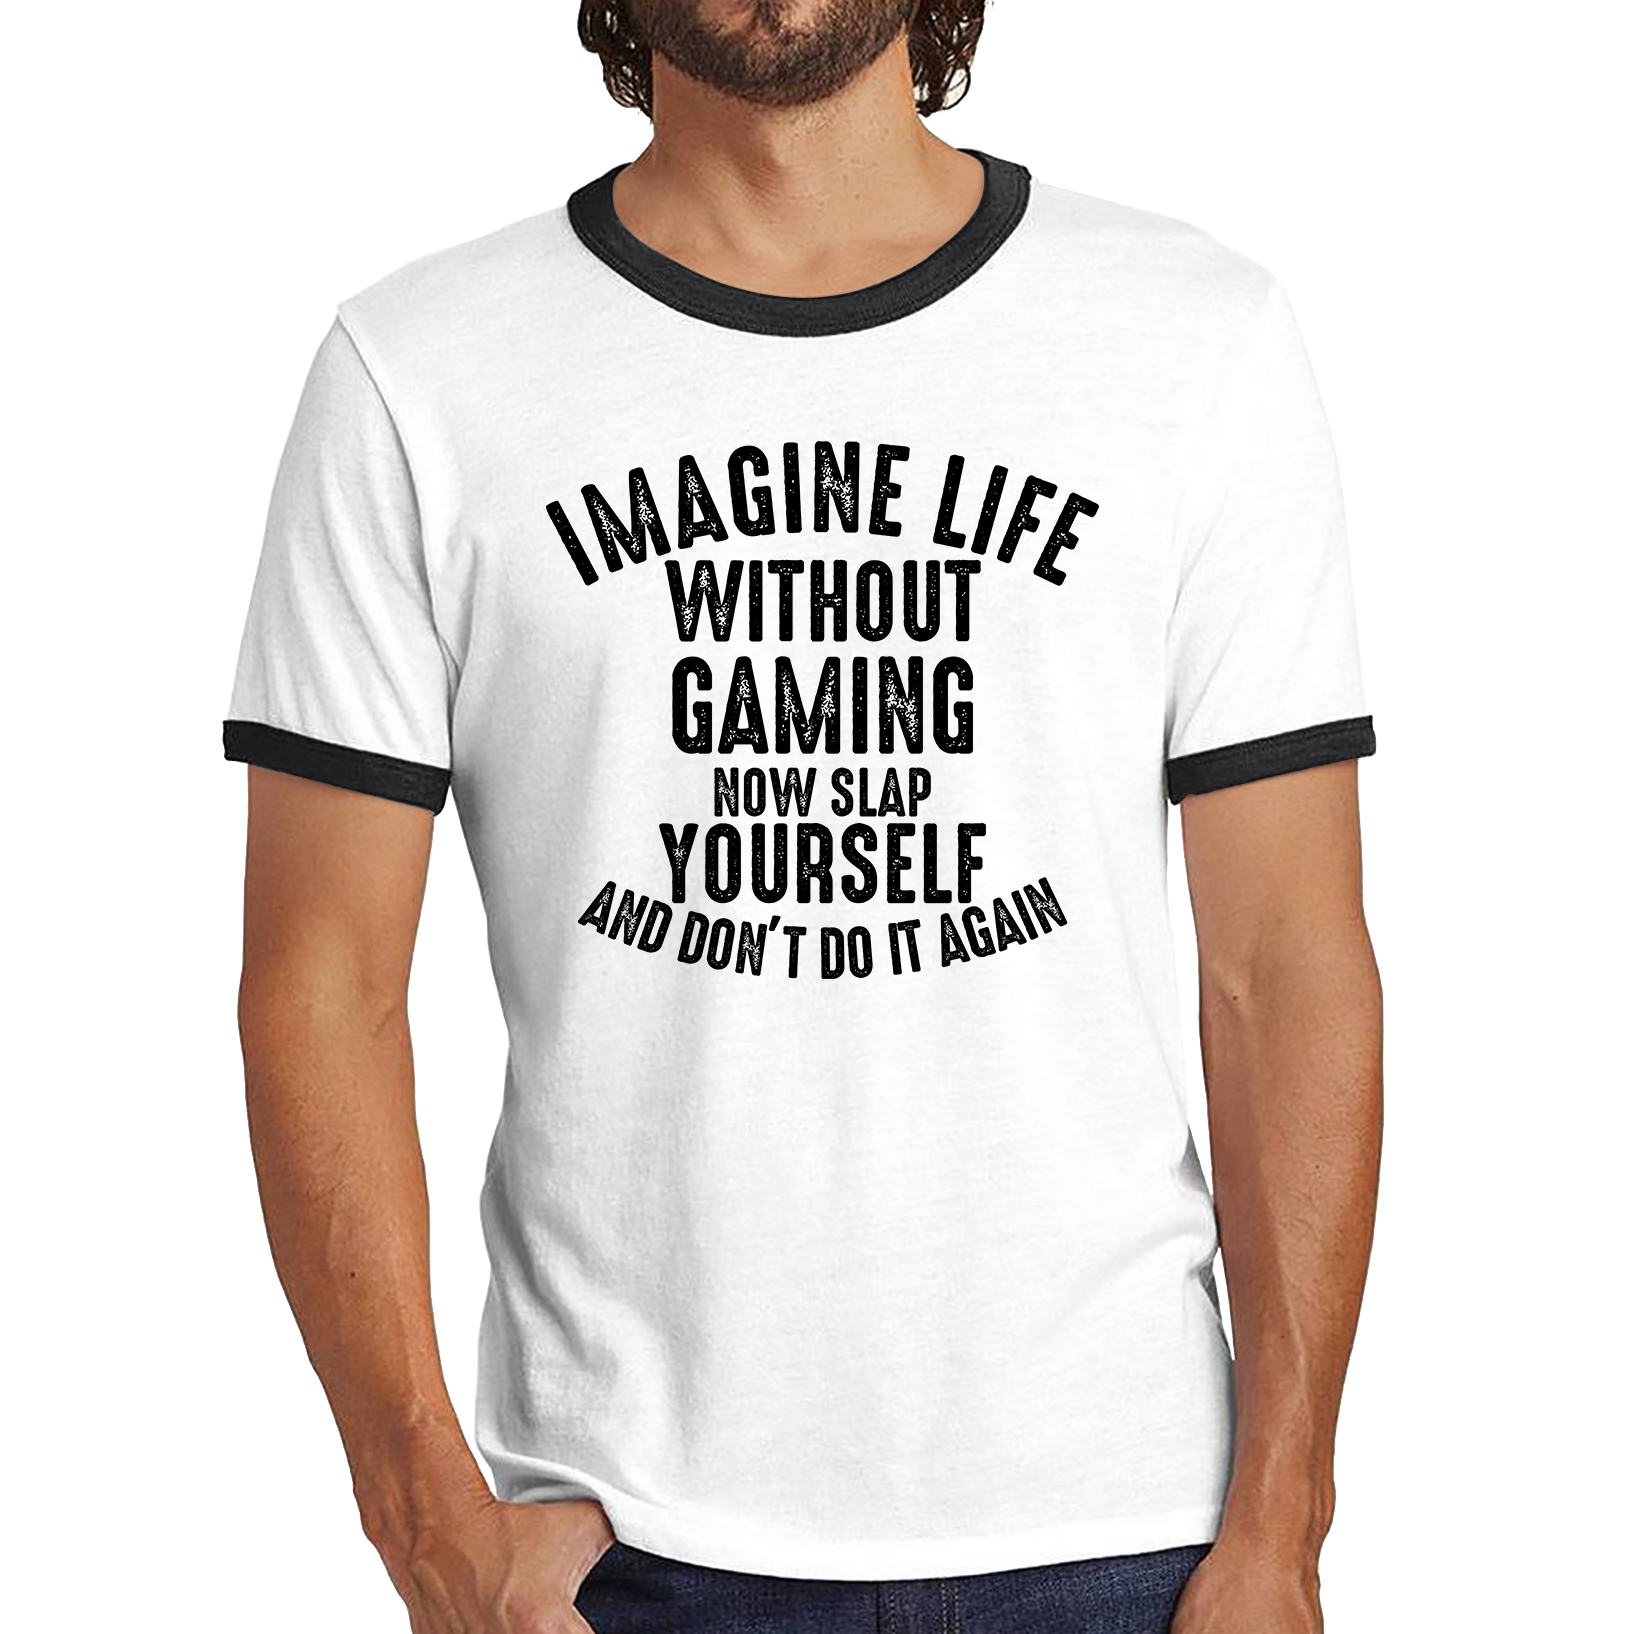 Imagine Life Without Gaming Now Slap Yourself And Don't Do It Again Shirt Gamer Players Game Lovers Funny Ringer T Shirt